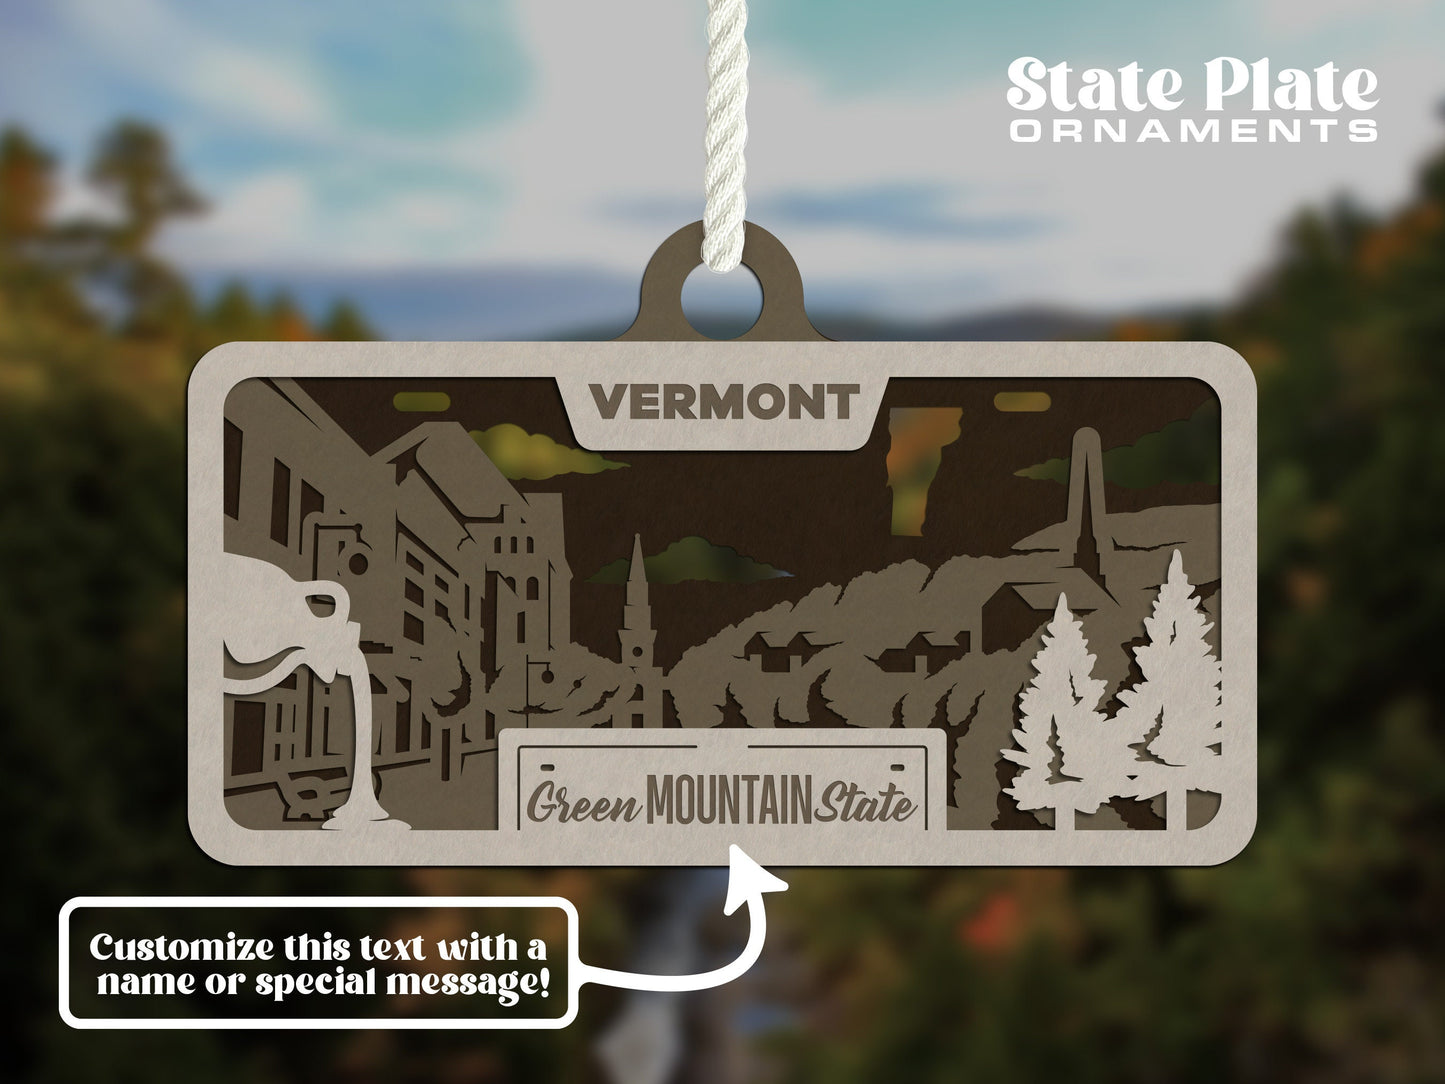 Vermont State Plate Ornament and Signage - SVG File Download - Sized for Glowforge - Laser Ready Digital Files